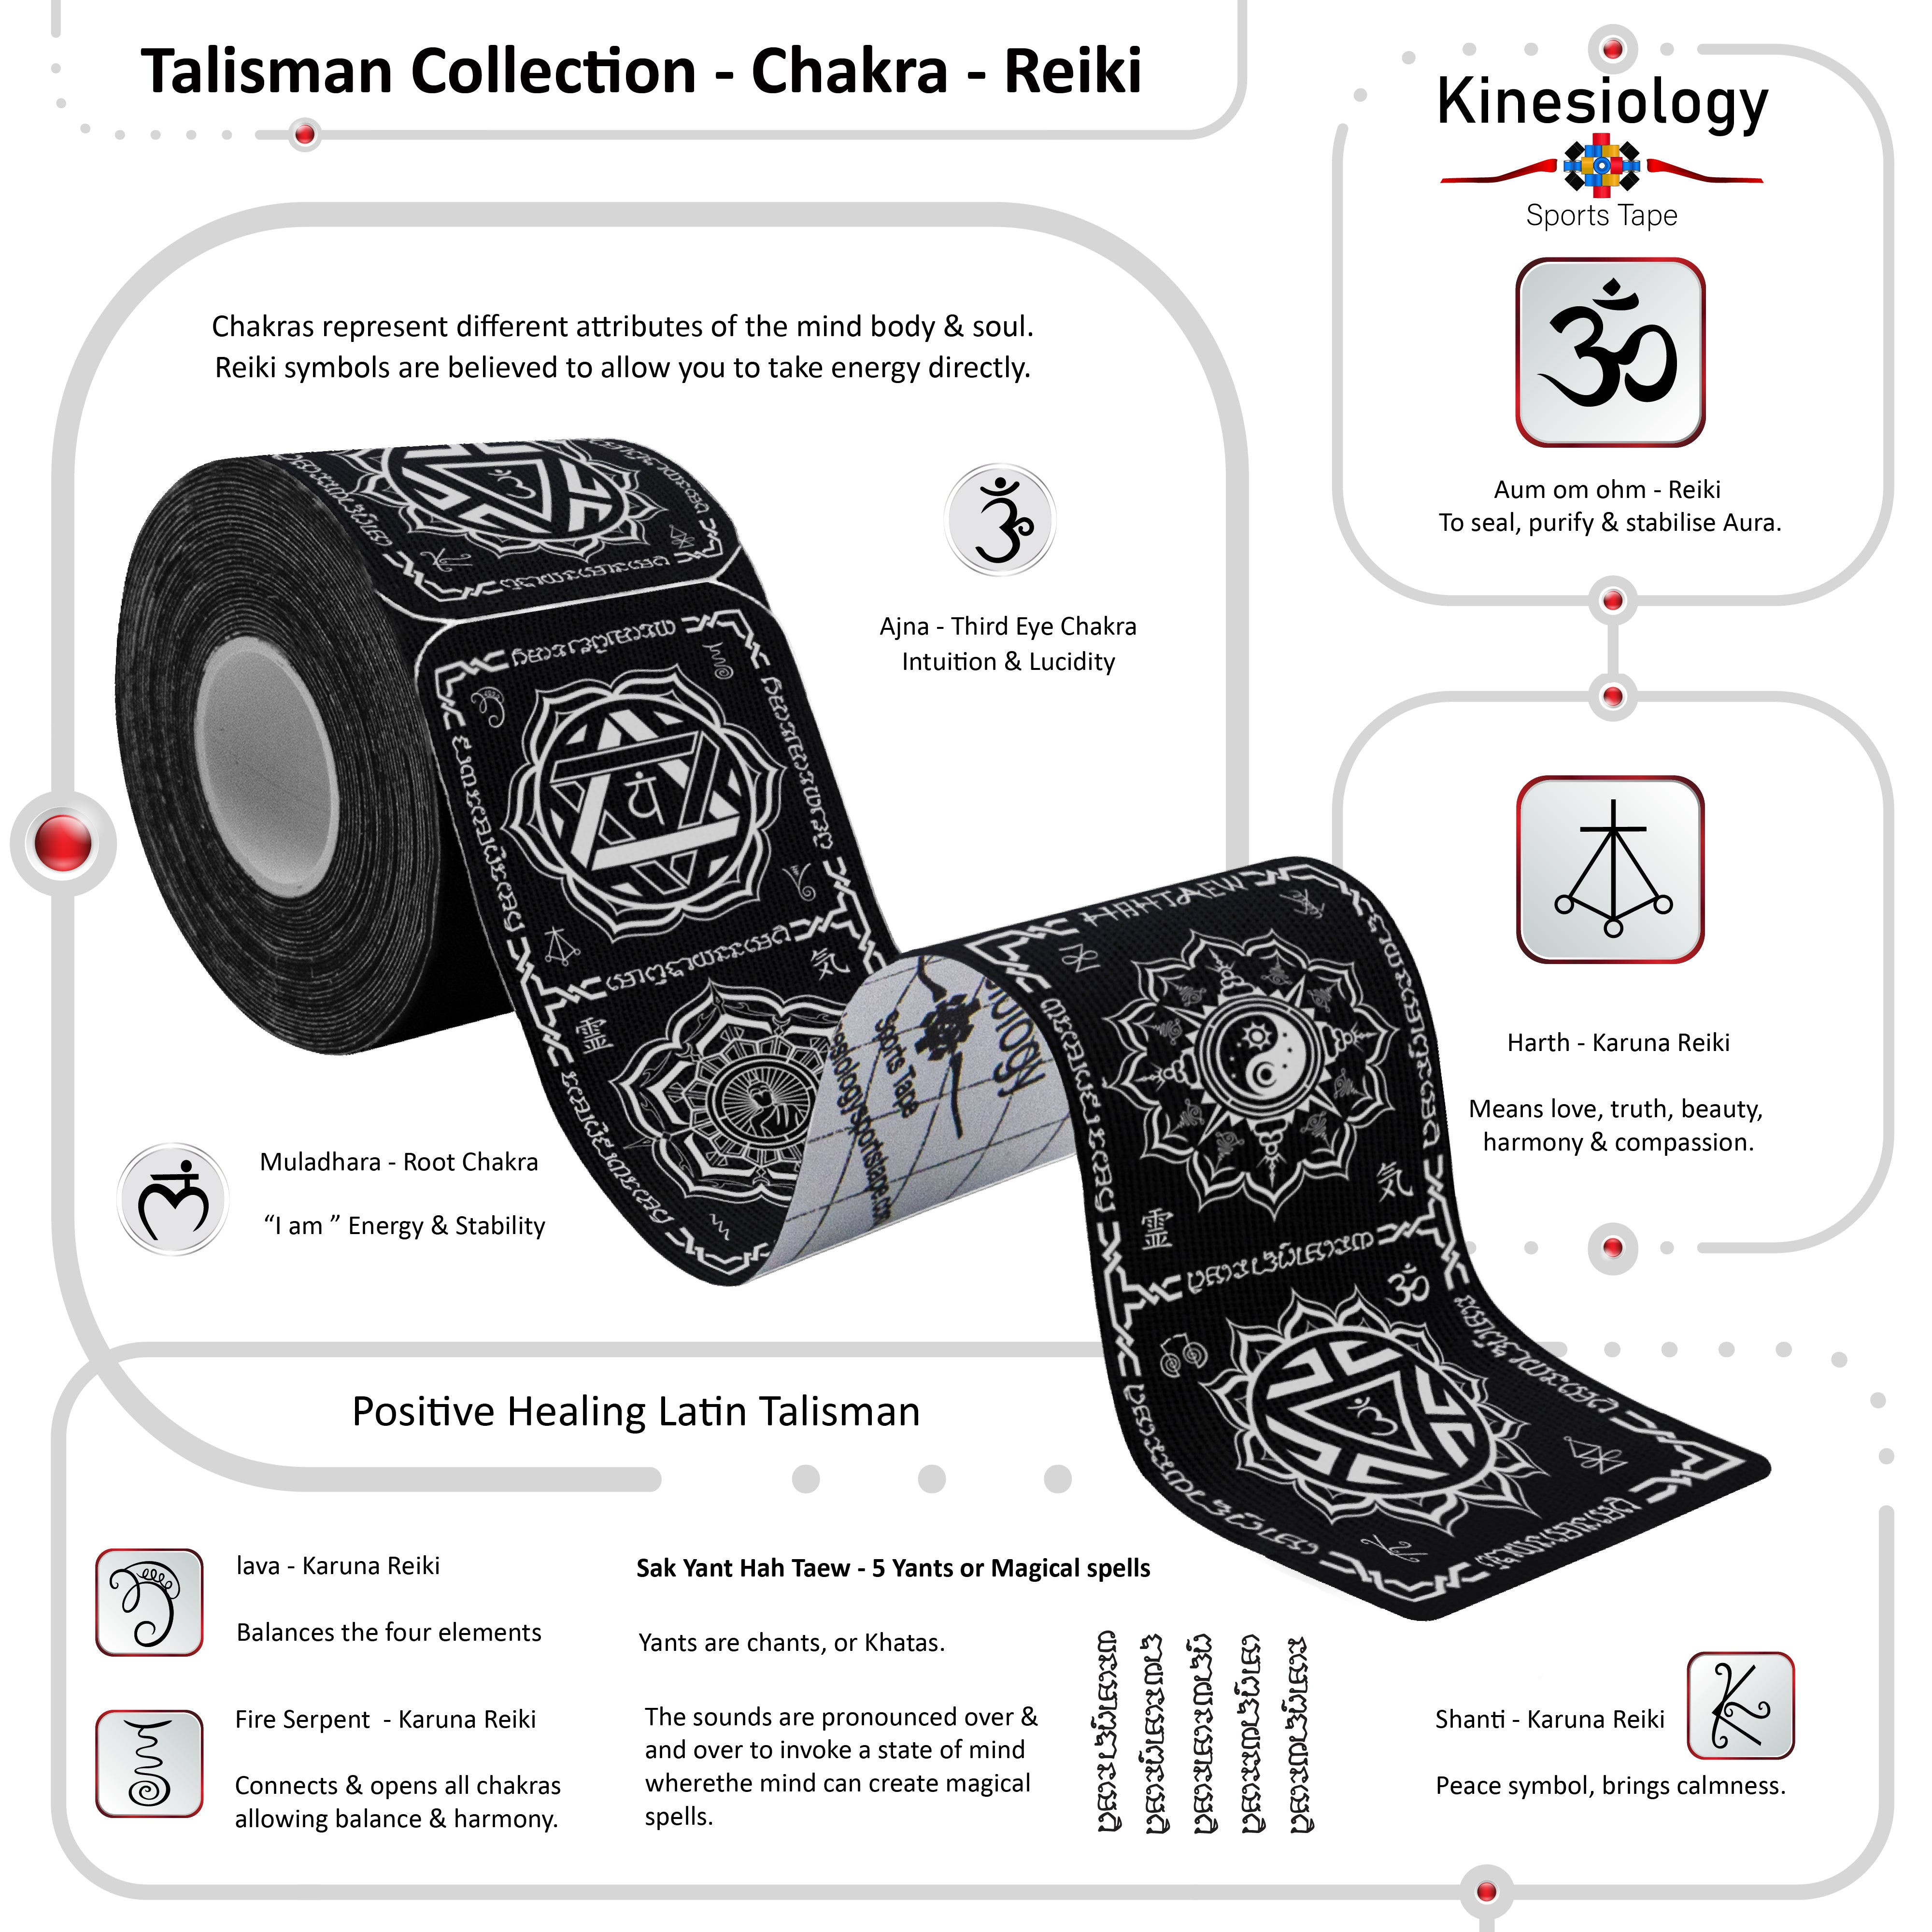 Black Kinesiology Tape Pre Cut with Dispenser - Talisman - Chakra - Vertical Design - Athletic Sports Tape - For Healing and Recovery